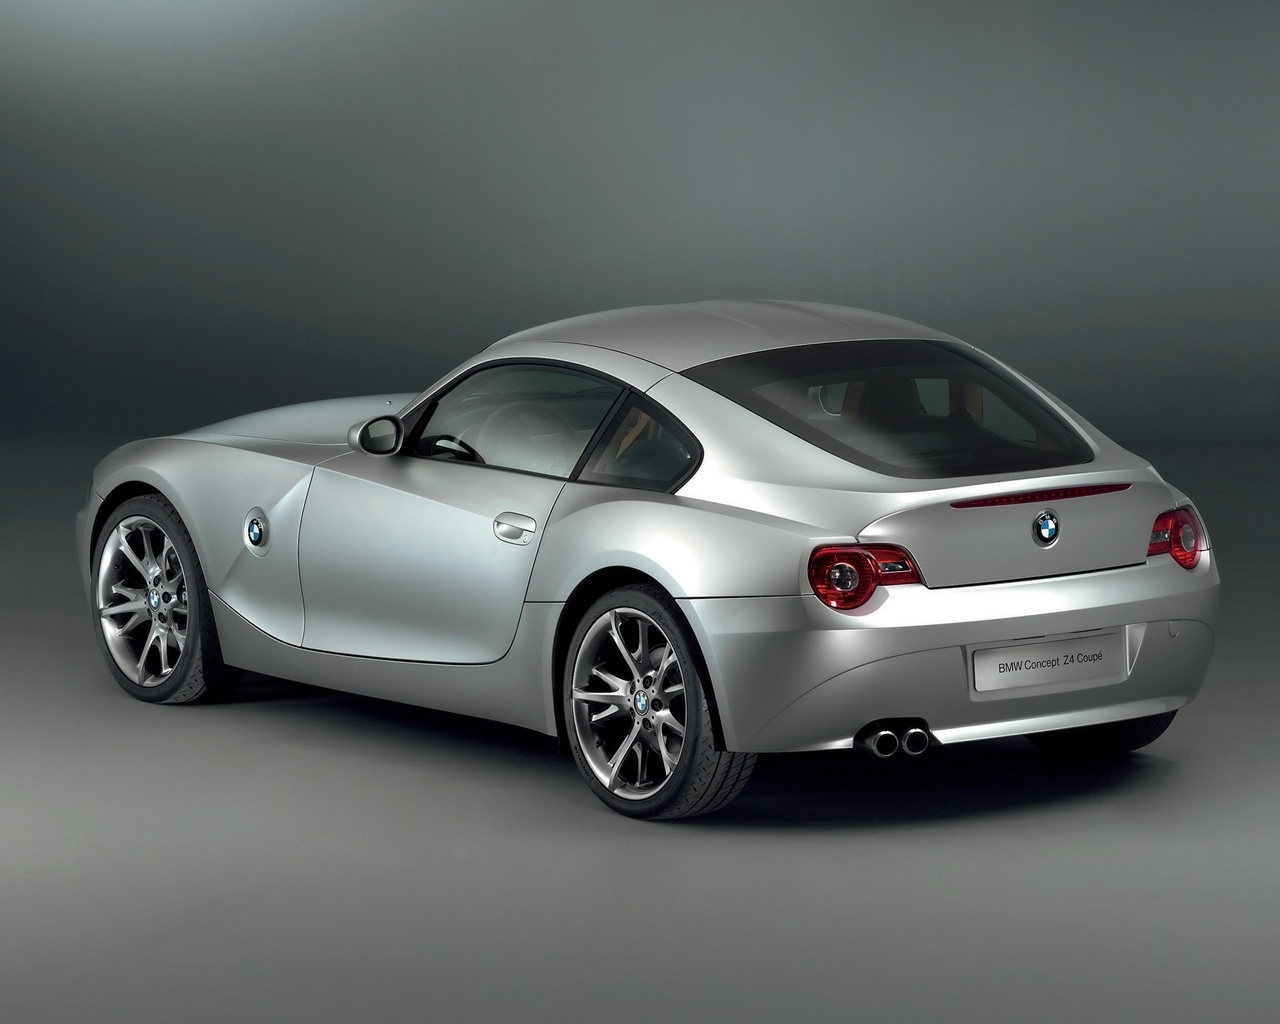 BMW Z4 Coupe Concept RA 2005 for 1280 x 1024 resolution